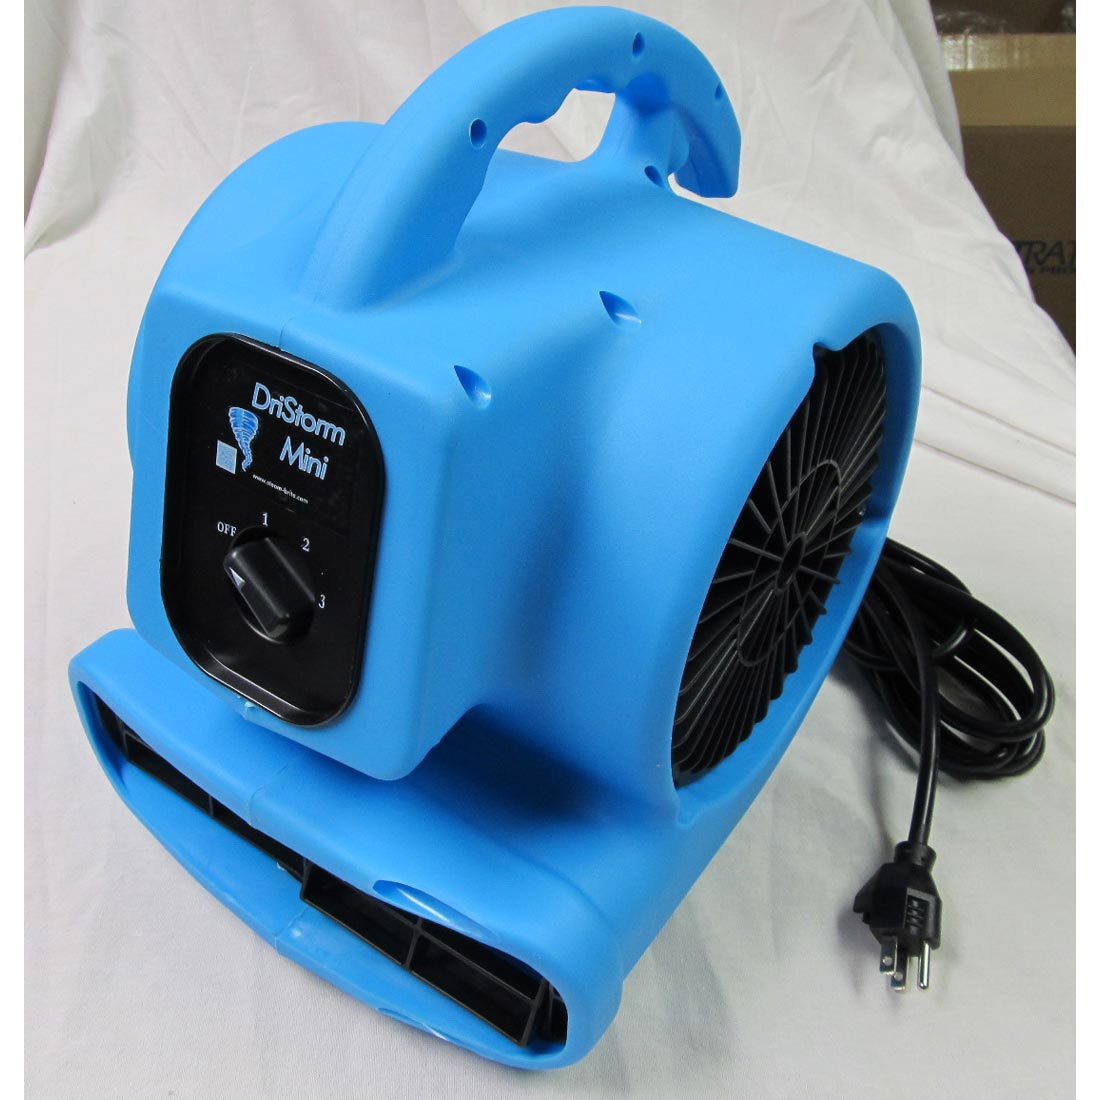 San Antonio Tx Compact Air Mover Carpet Blower Rental 23amp in size 1100 X 1100